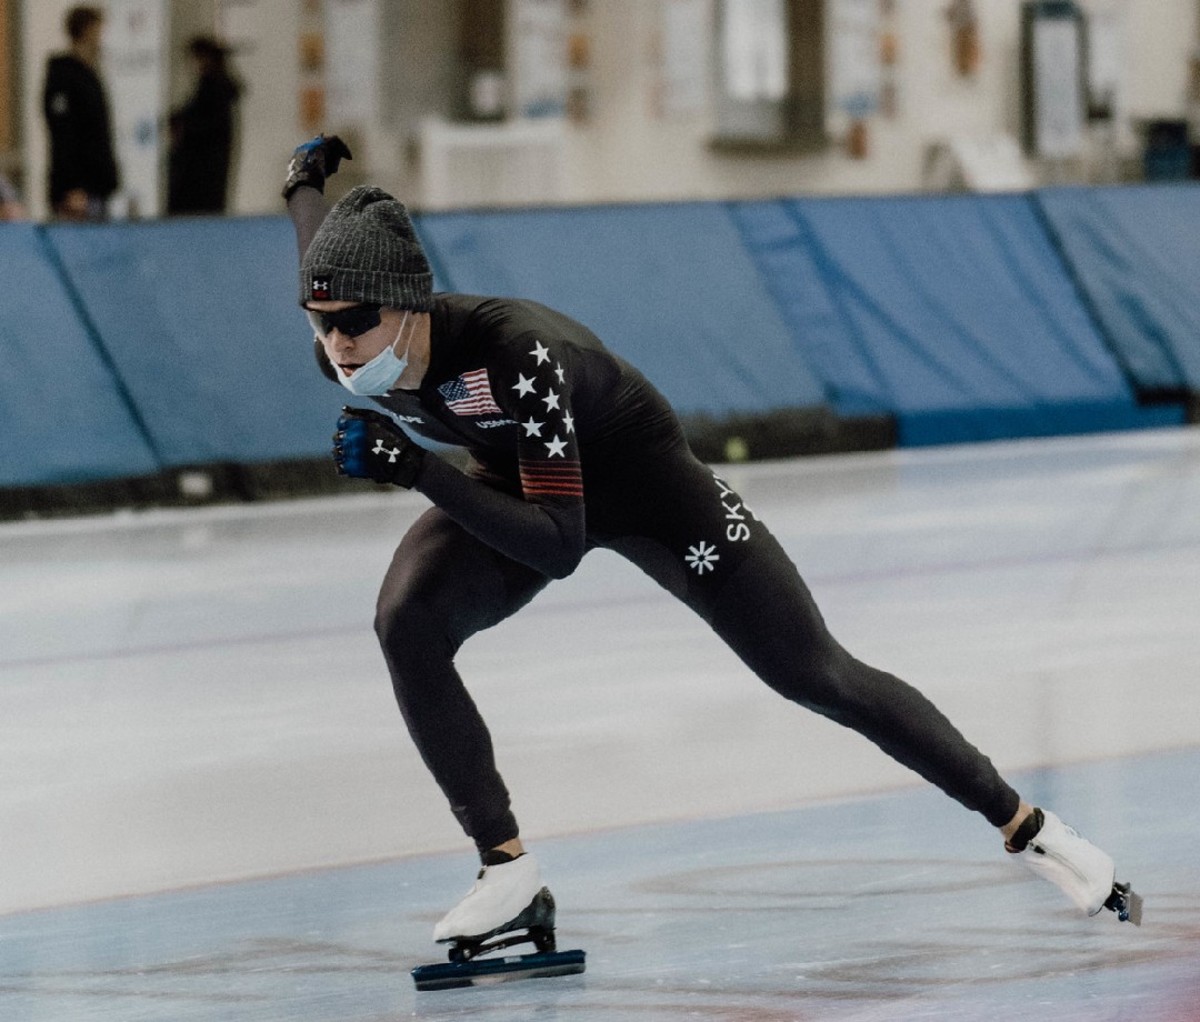 Team USA speed skater Conor McDermott-Mostowy in mid-stride on the ice